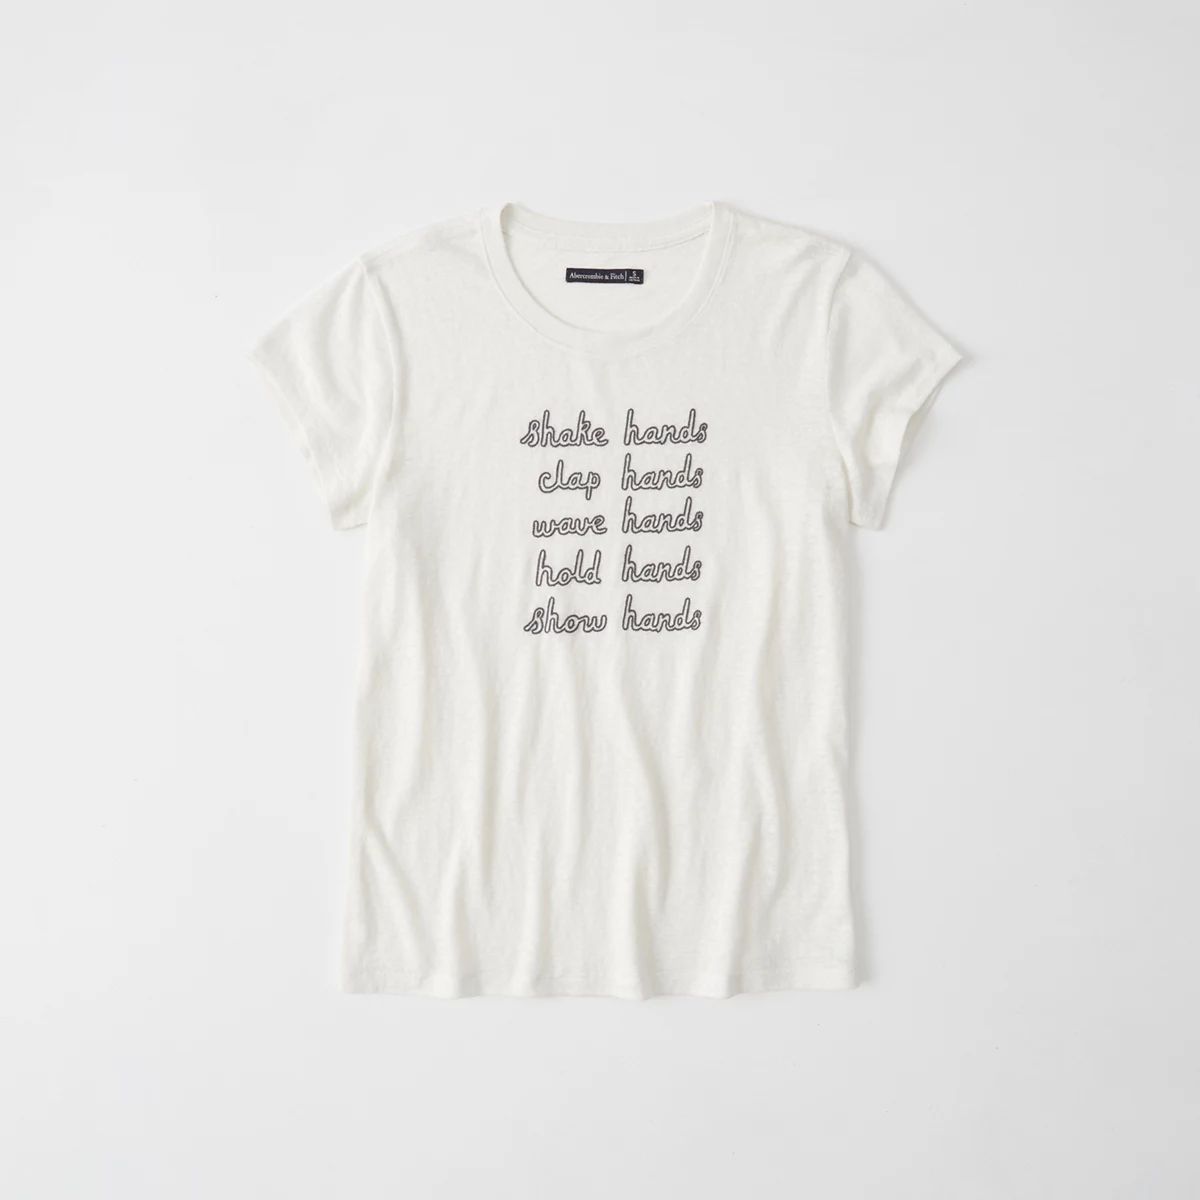 Embroidered Statement Tee | Abercrombie & Fitch US & UK